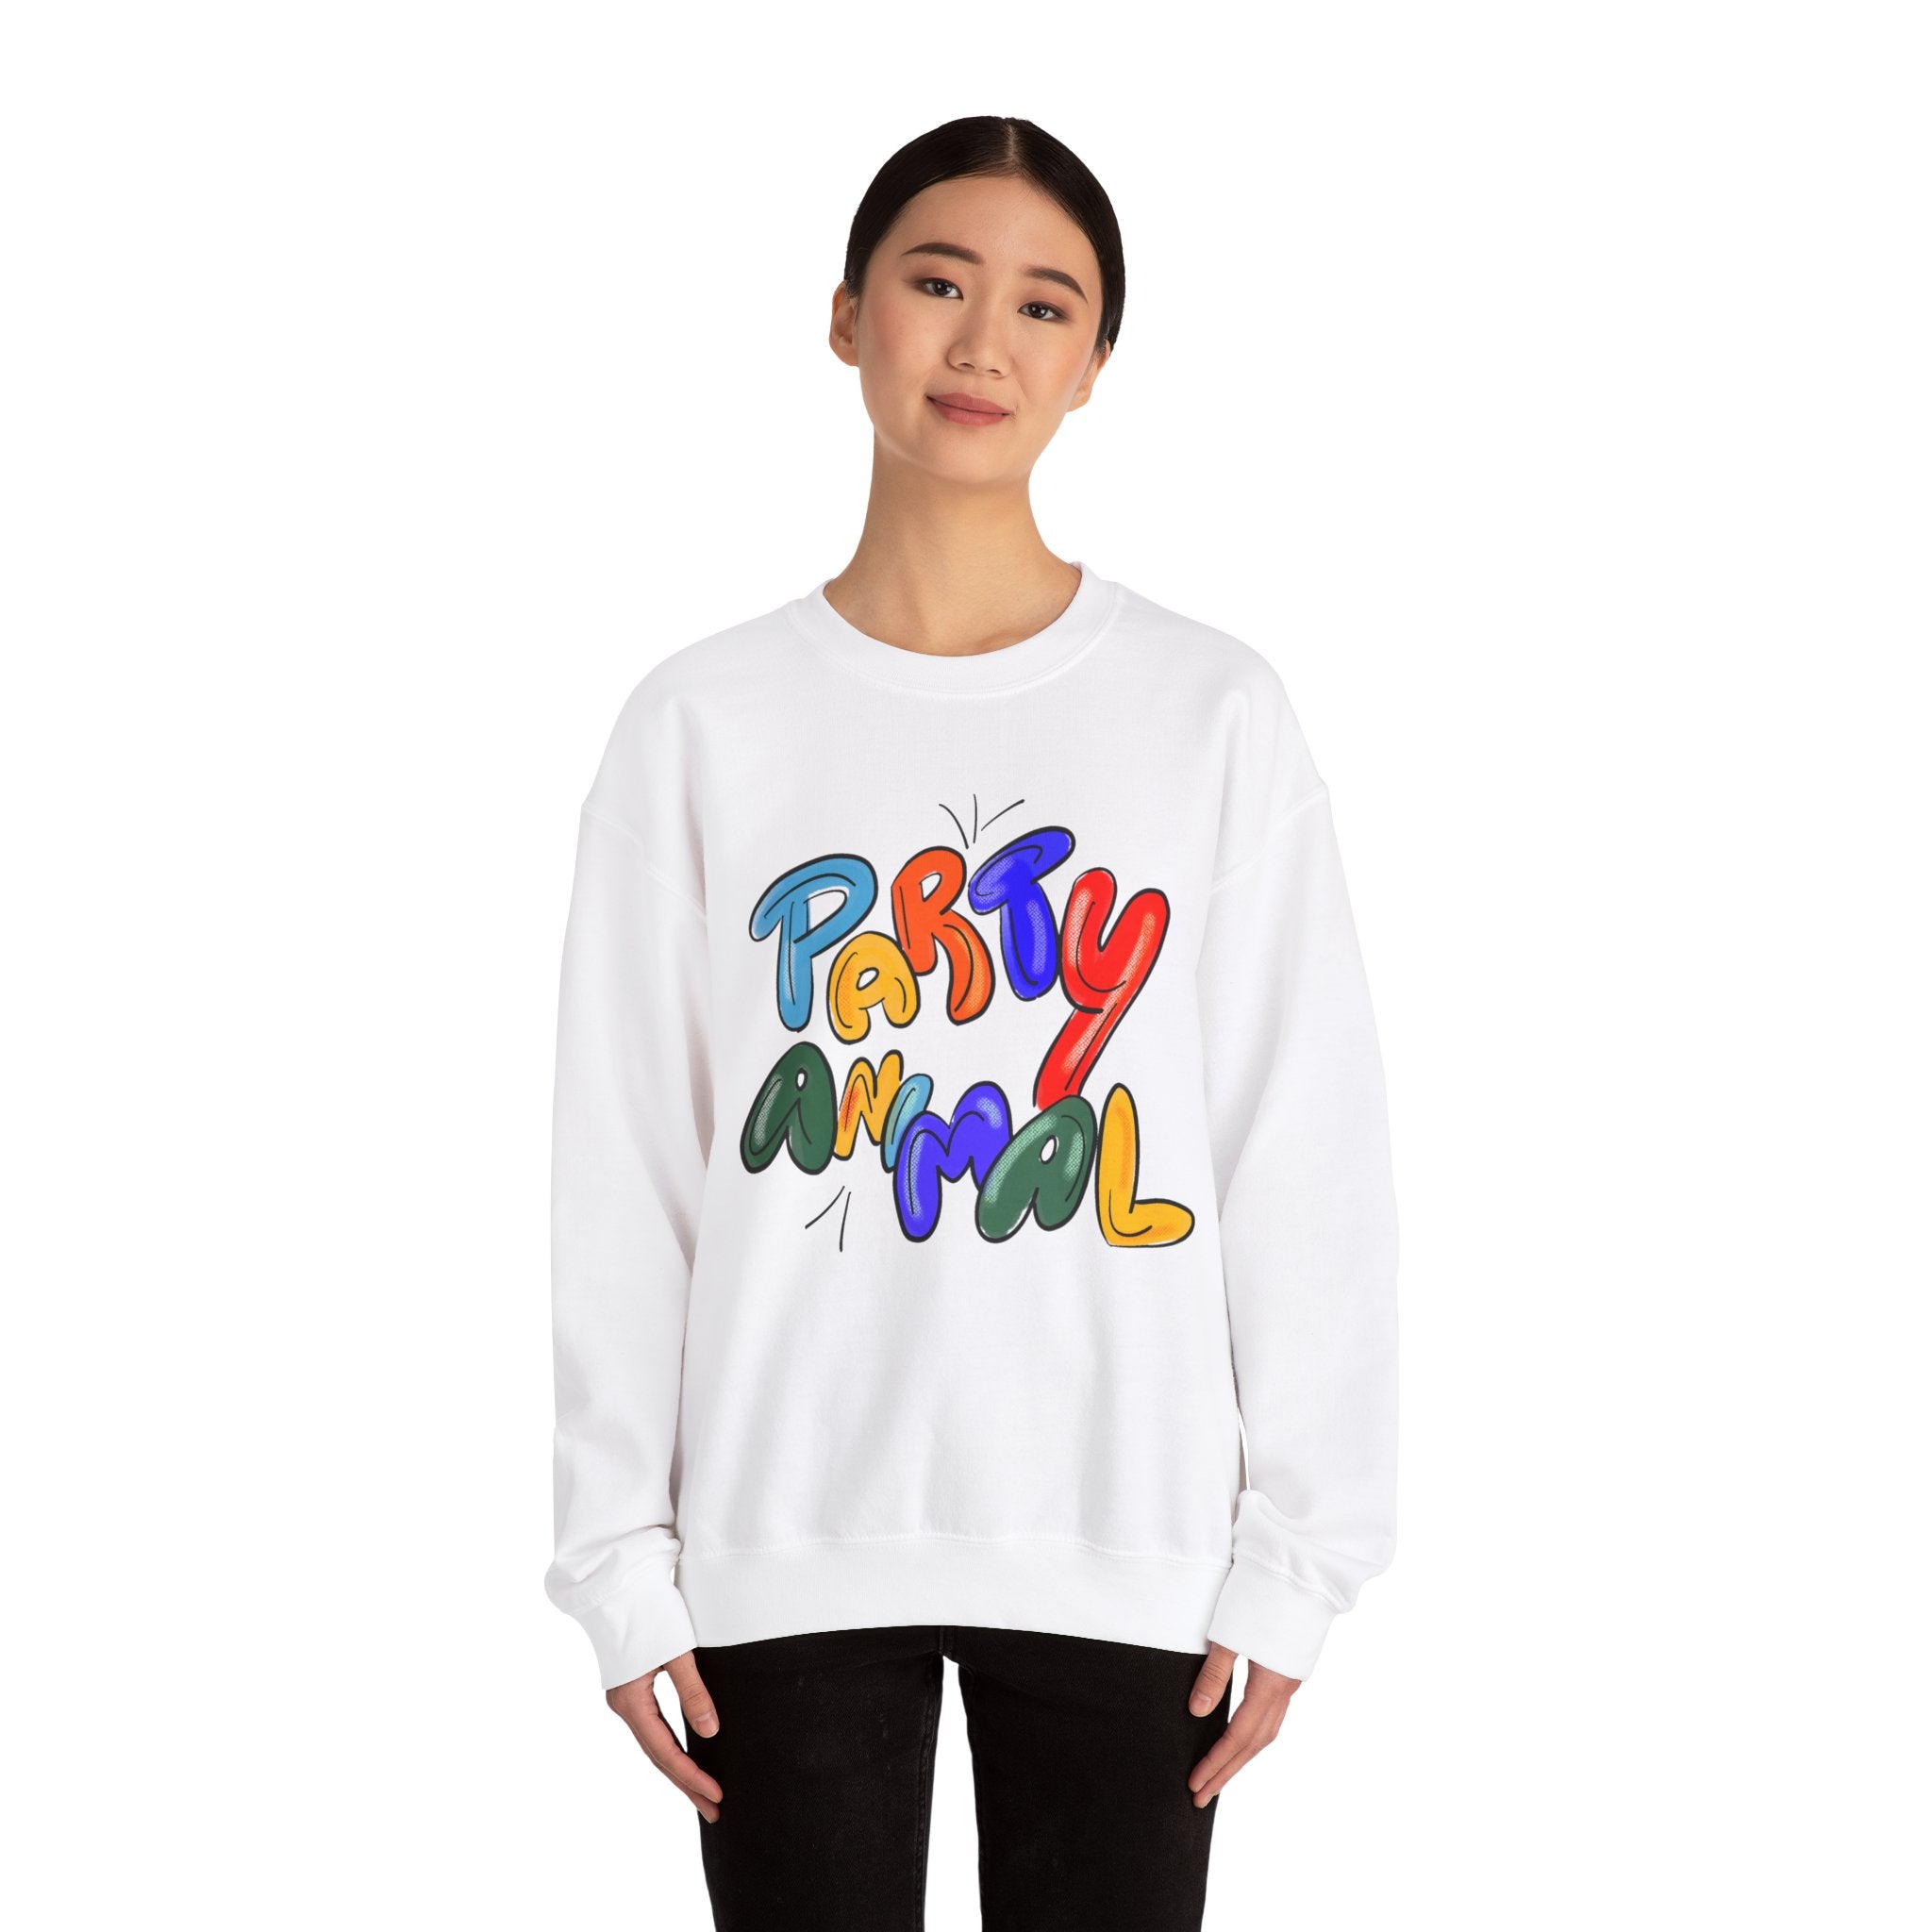 Party Animal Sweater